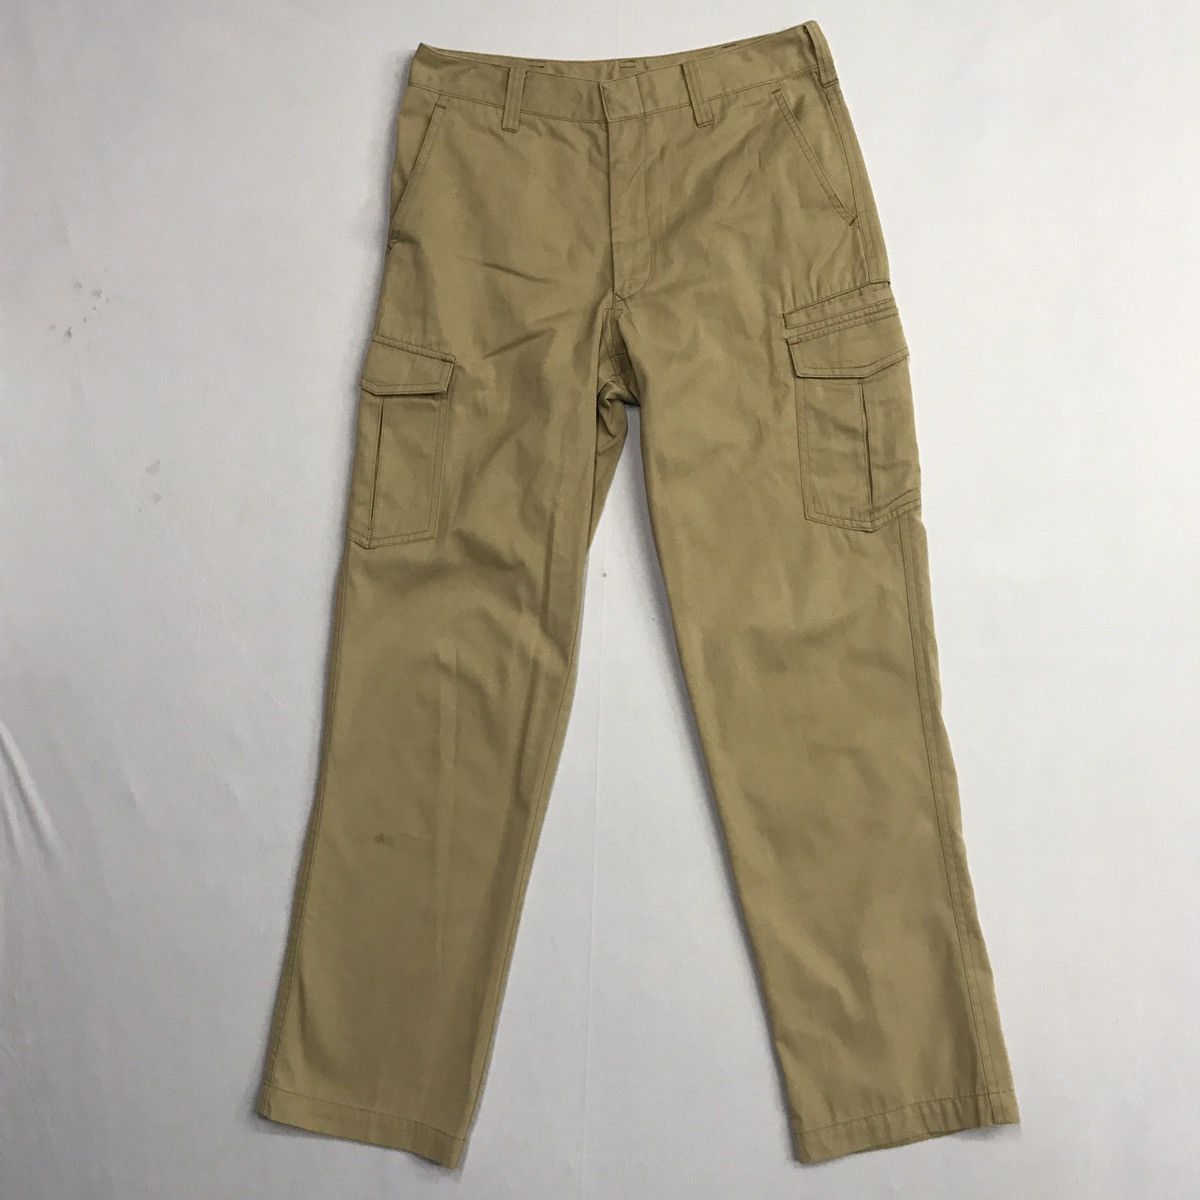 Japanese Brand Tobiryu Cargo Pants Trousers Multipocket Tactical Pants ...